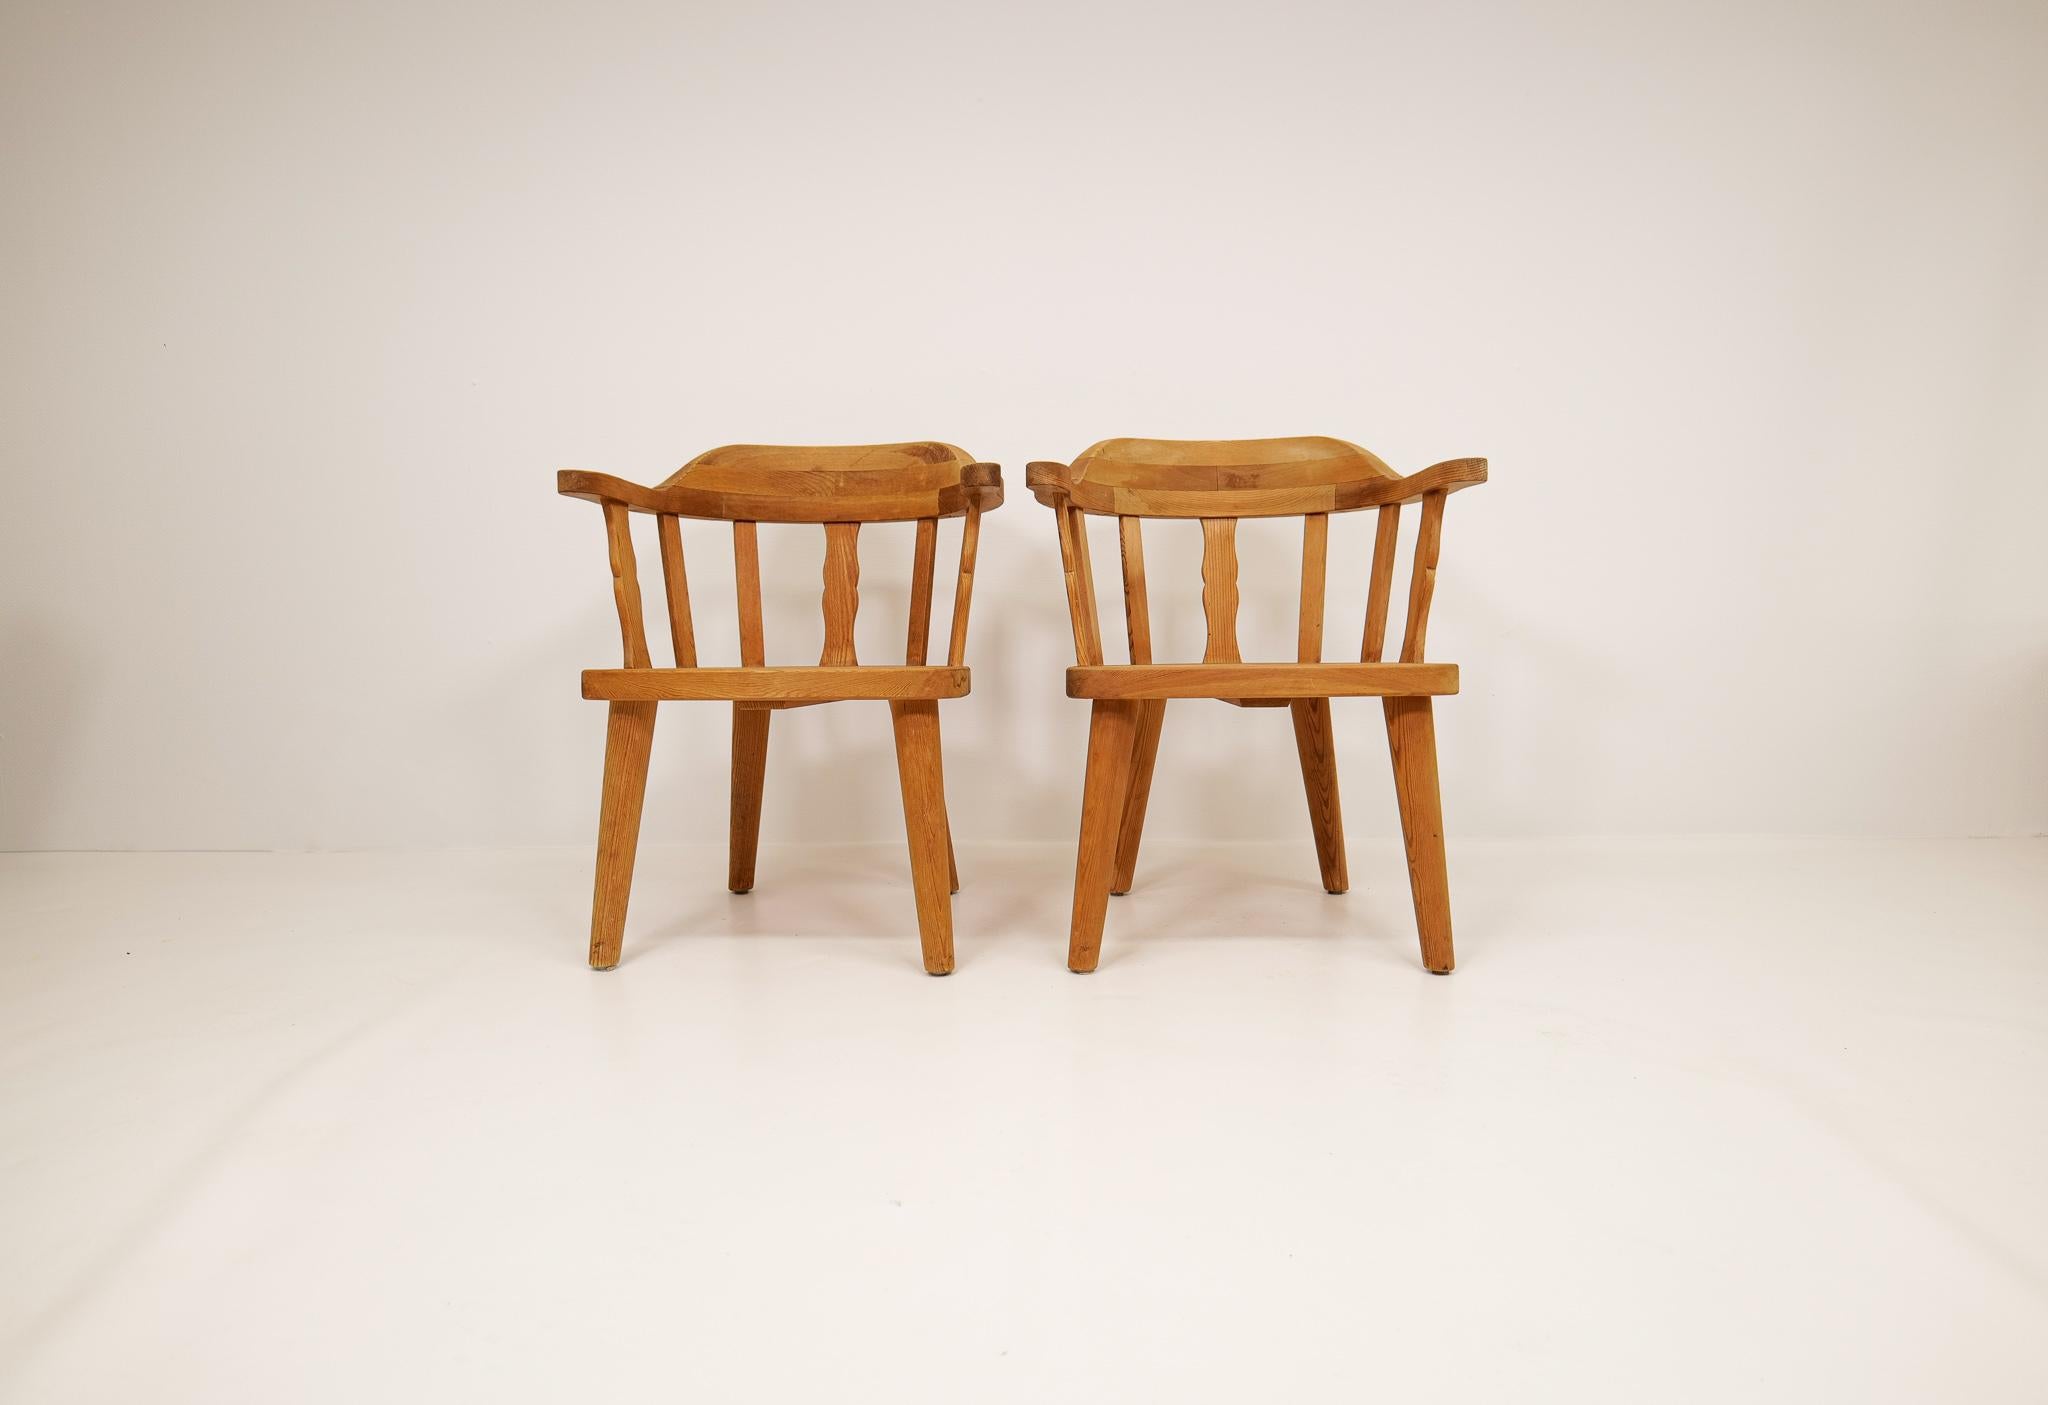 These simple yet complex solid pine chairs were created and manufactured in Norway by Krogenäs möbler.

Vintage condition, wear with consistent of age and use.

Dimensions: depth 40, width 50, seat height 41 , backrest 73 cm.
 